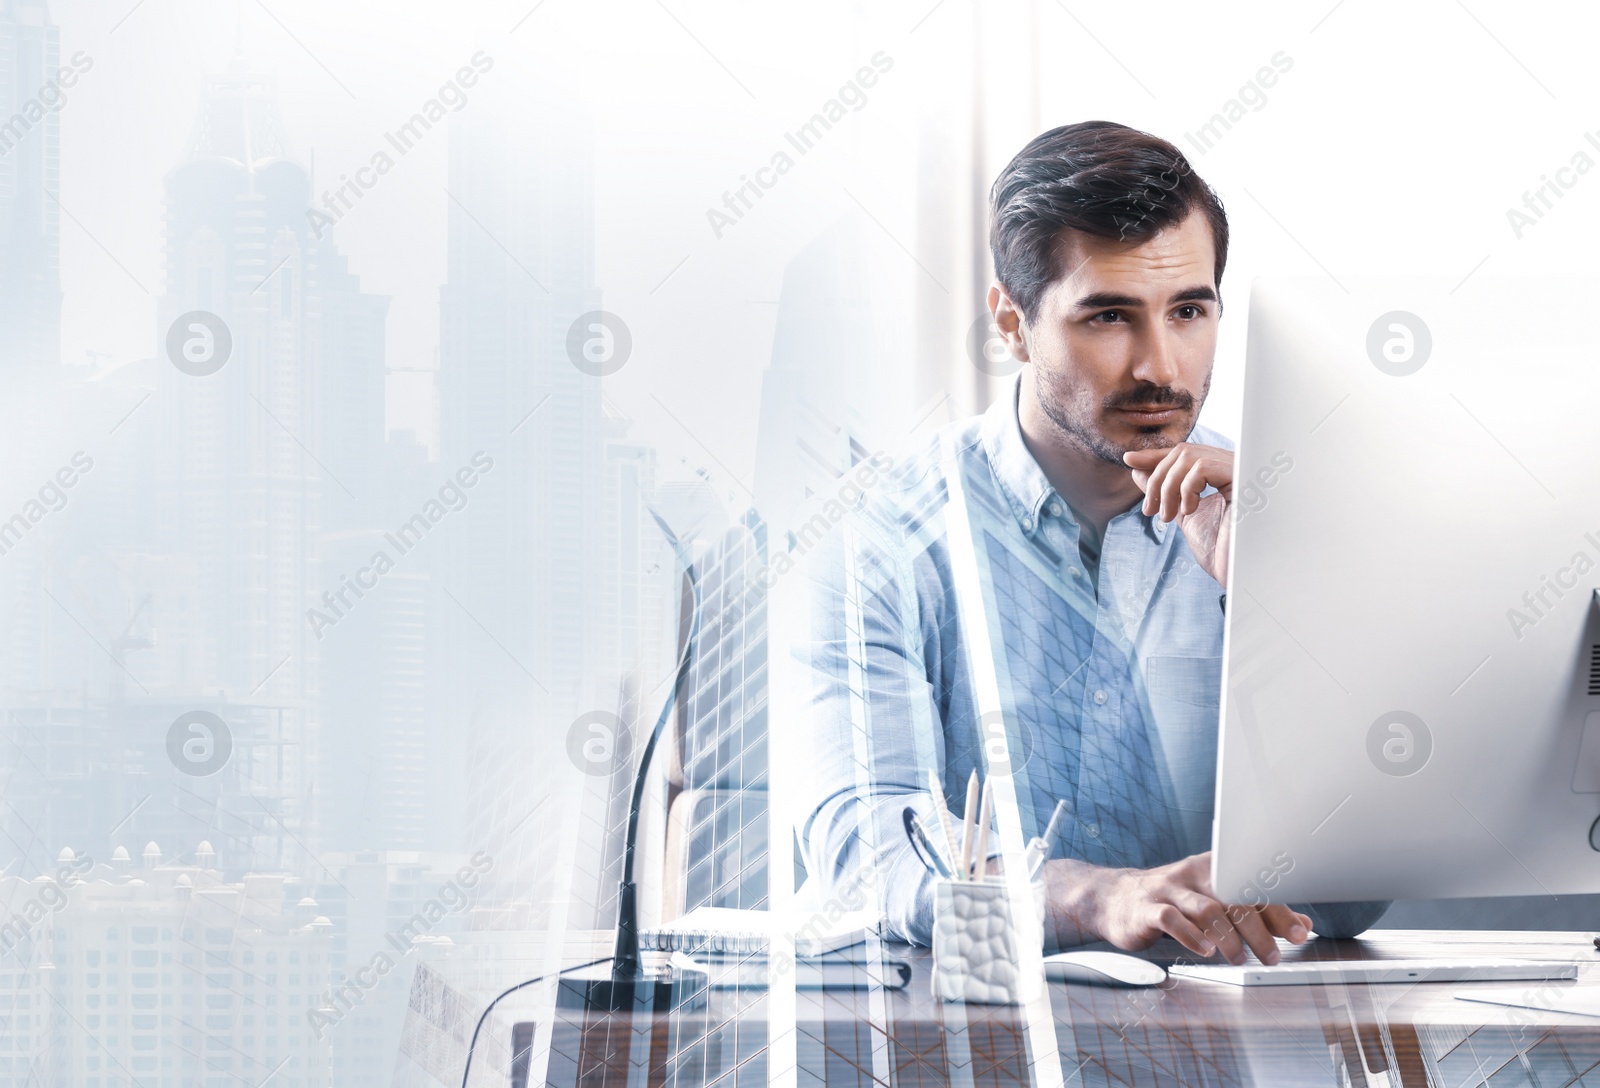 Image of Multiple exposure of architect working with computer at table and buildings